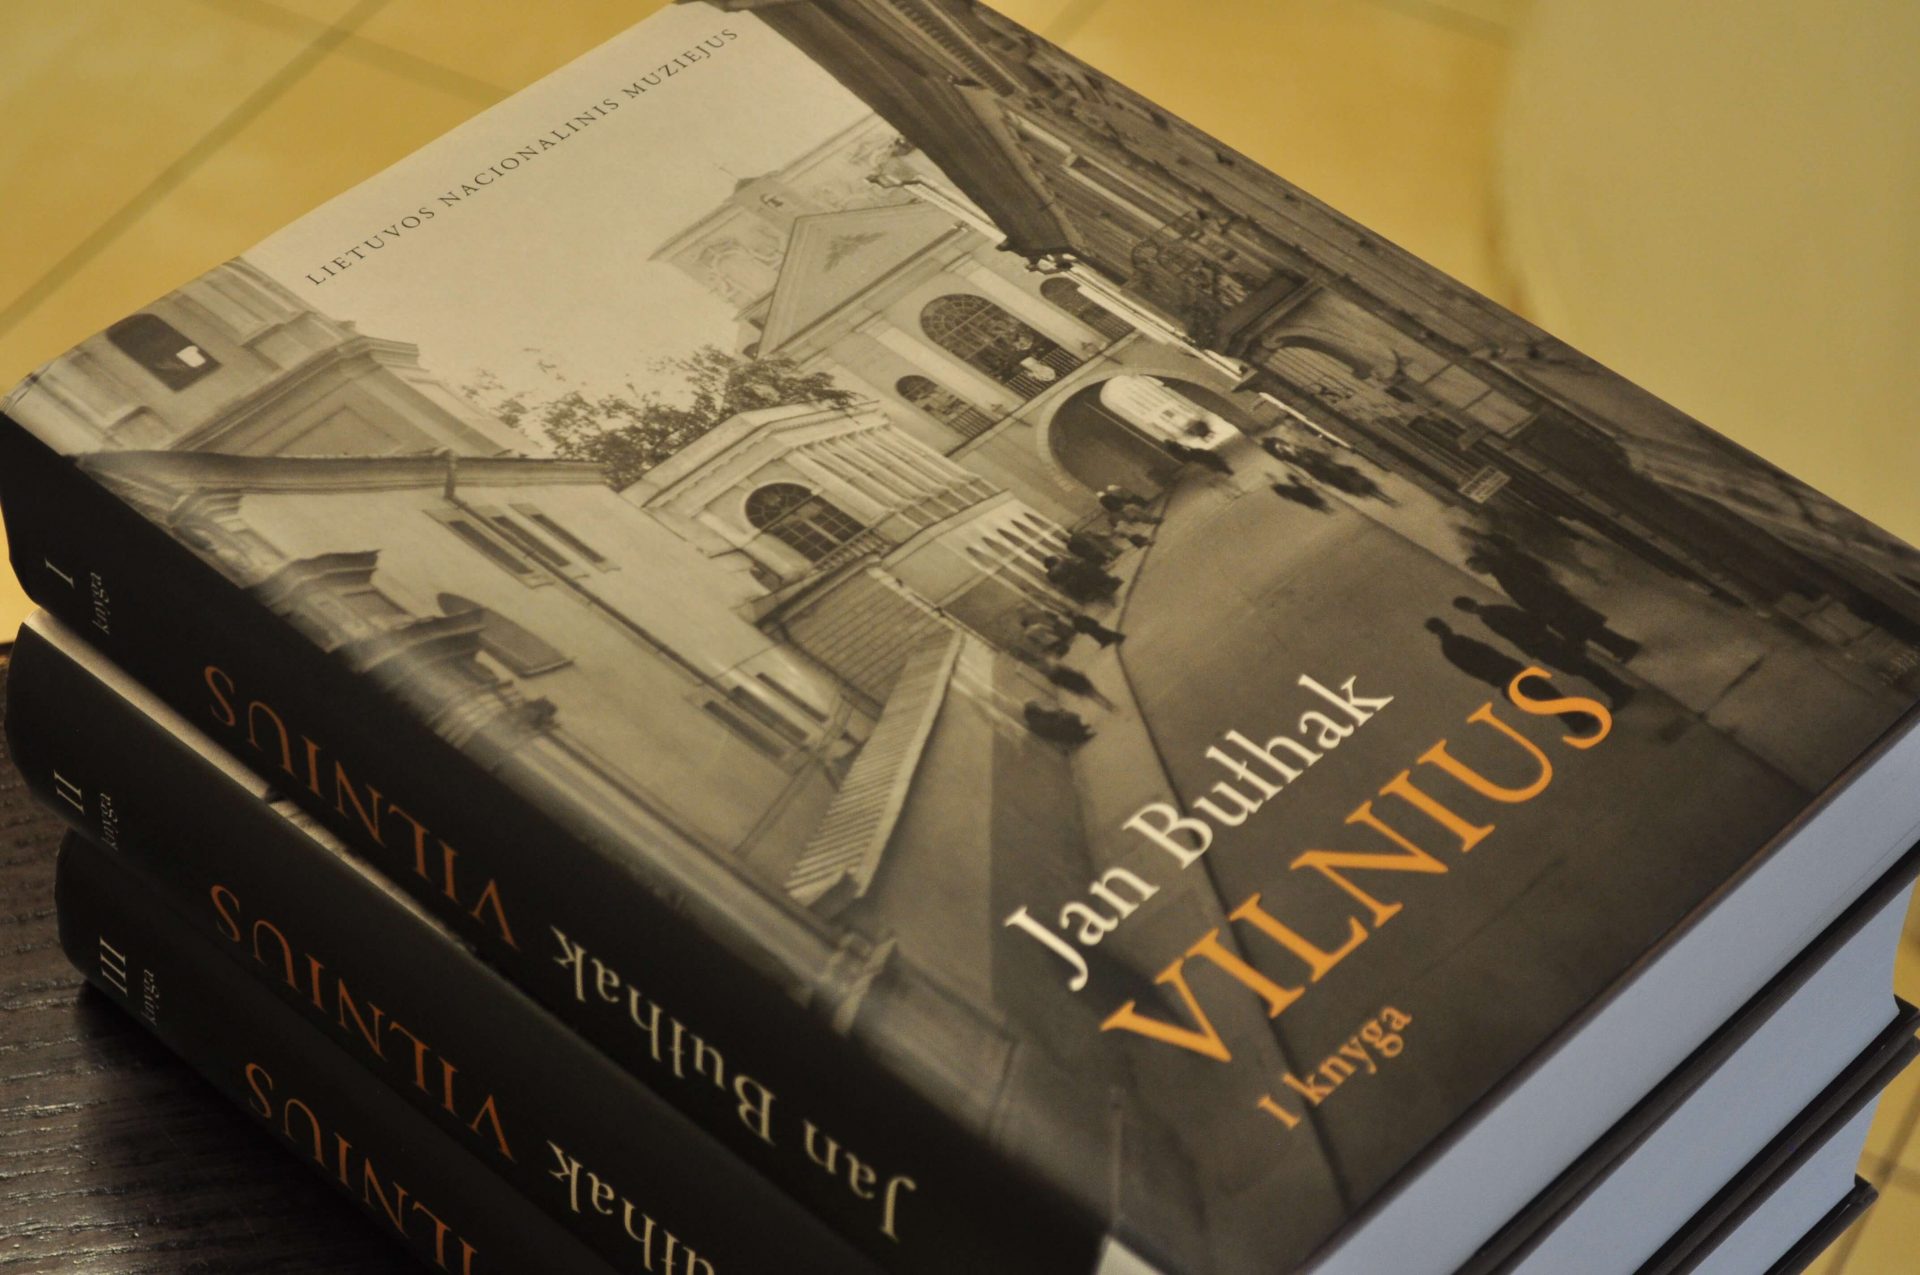 Vilnius in the first half of the 20th century by Jan Bulhak